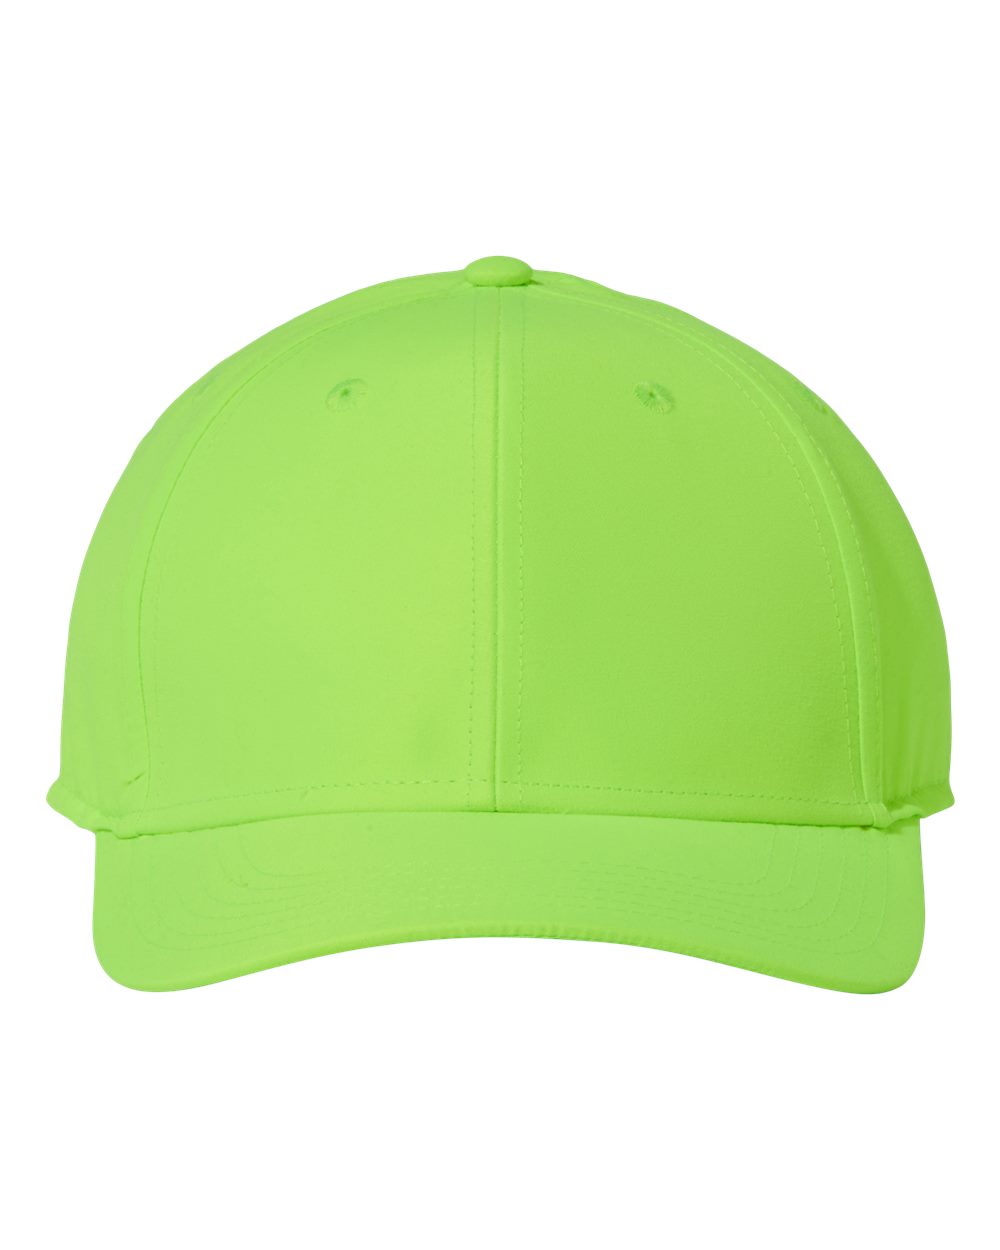 click to view Green Fluorescent